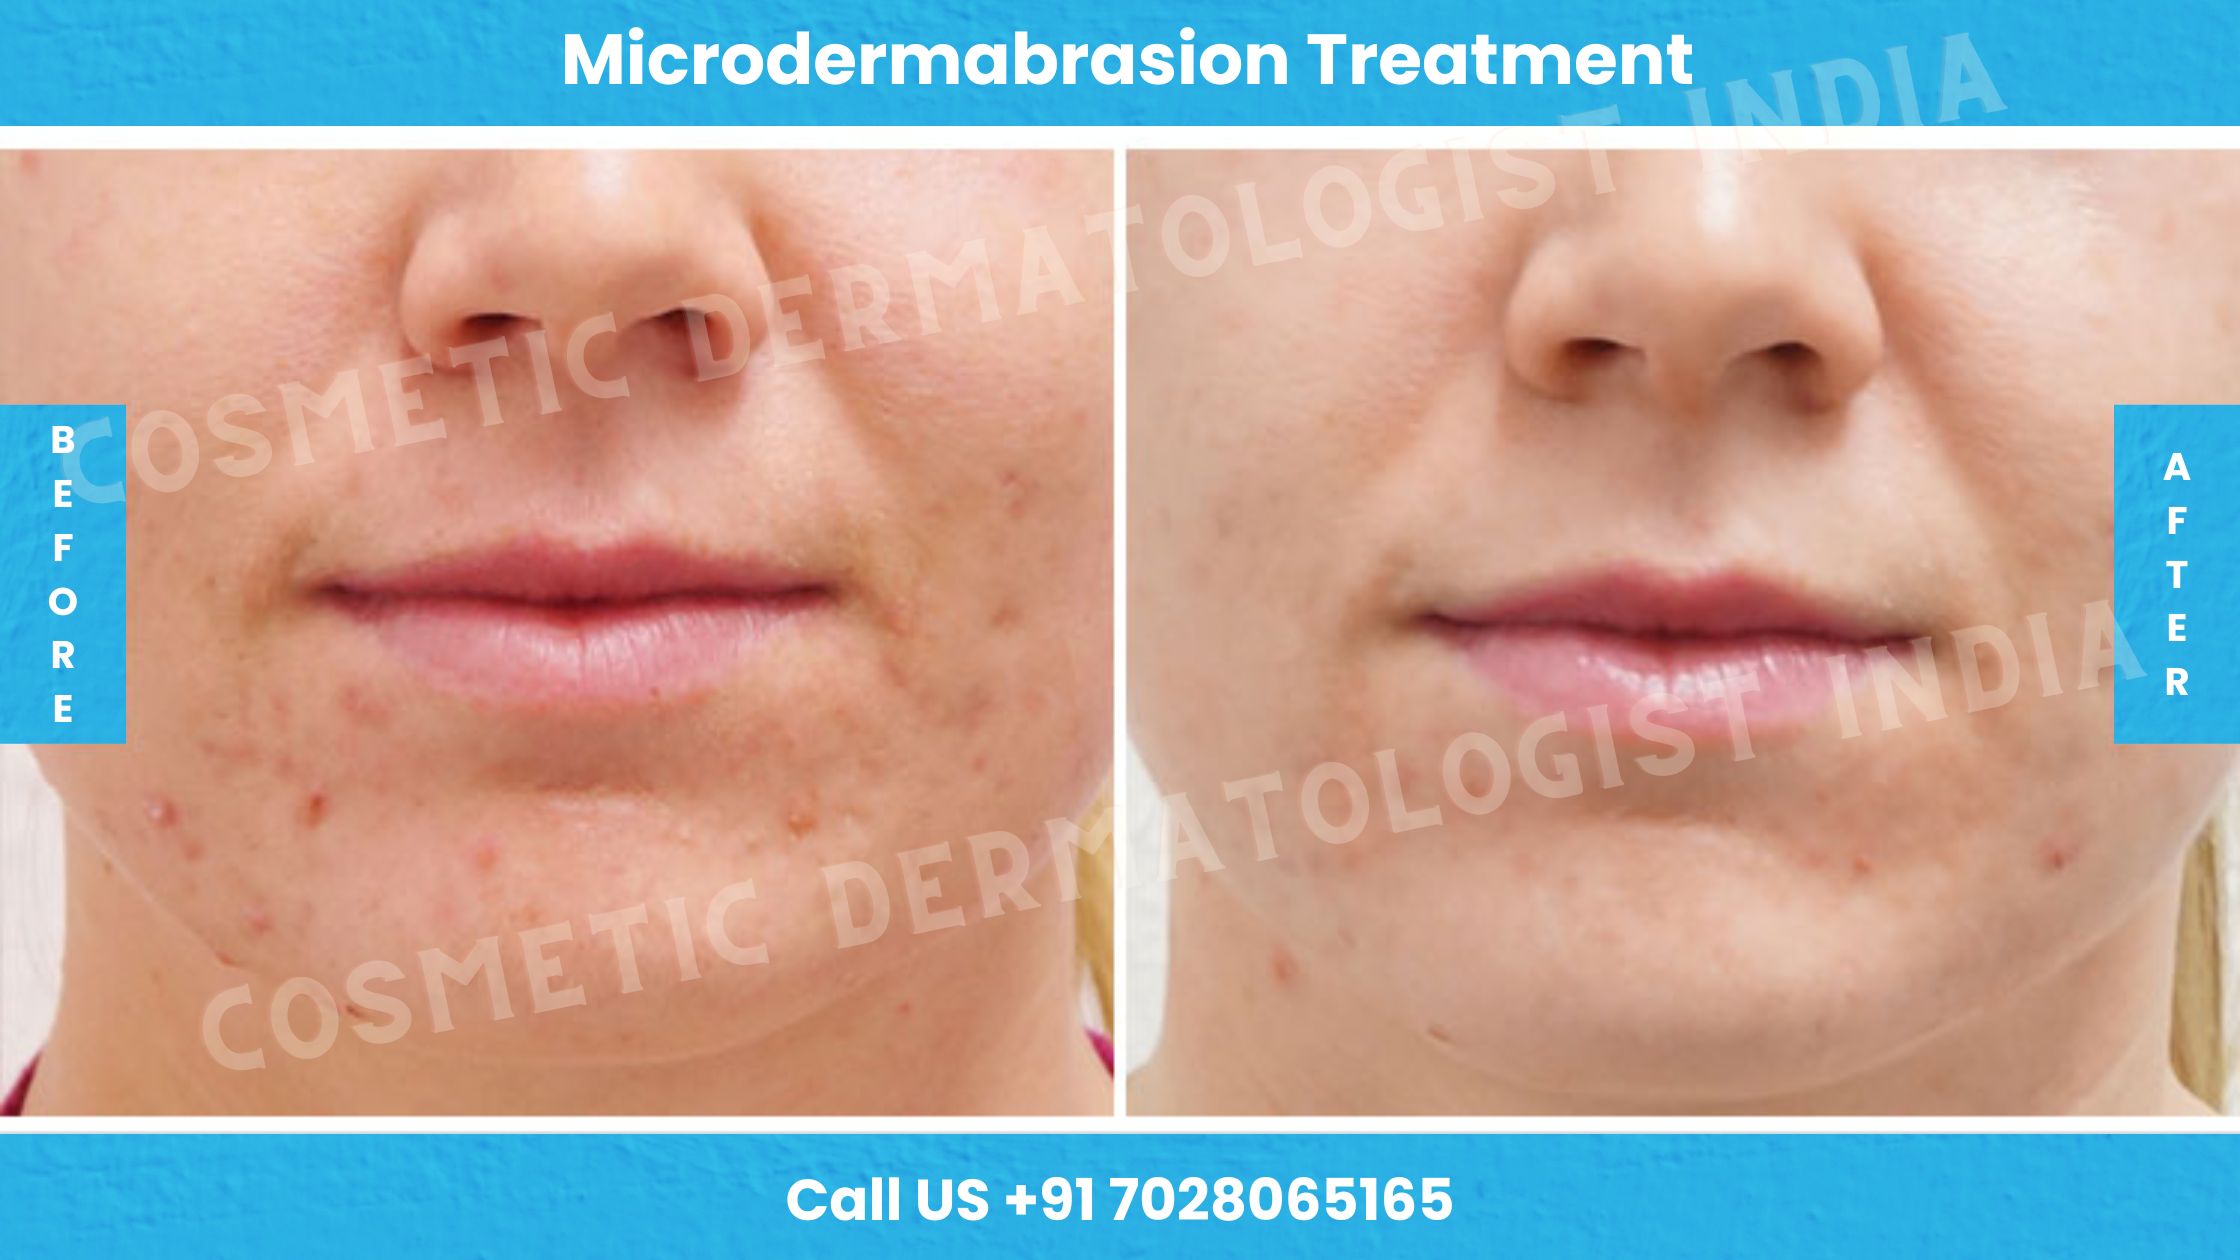 Before and After Images of Microdermabrasion Treatment 